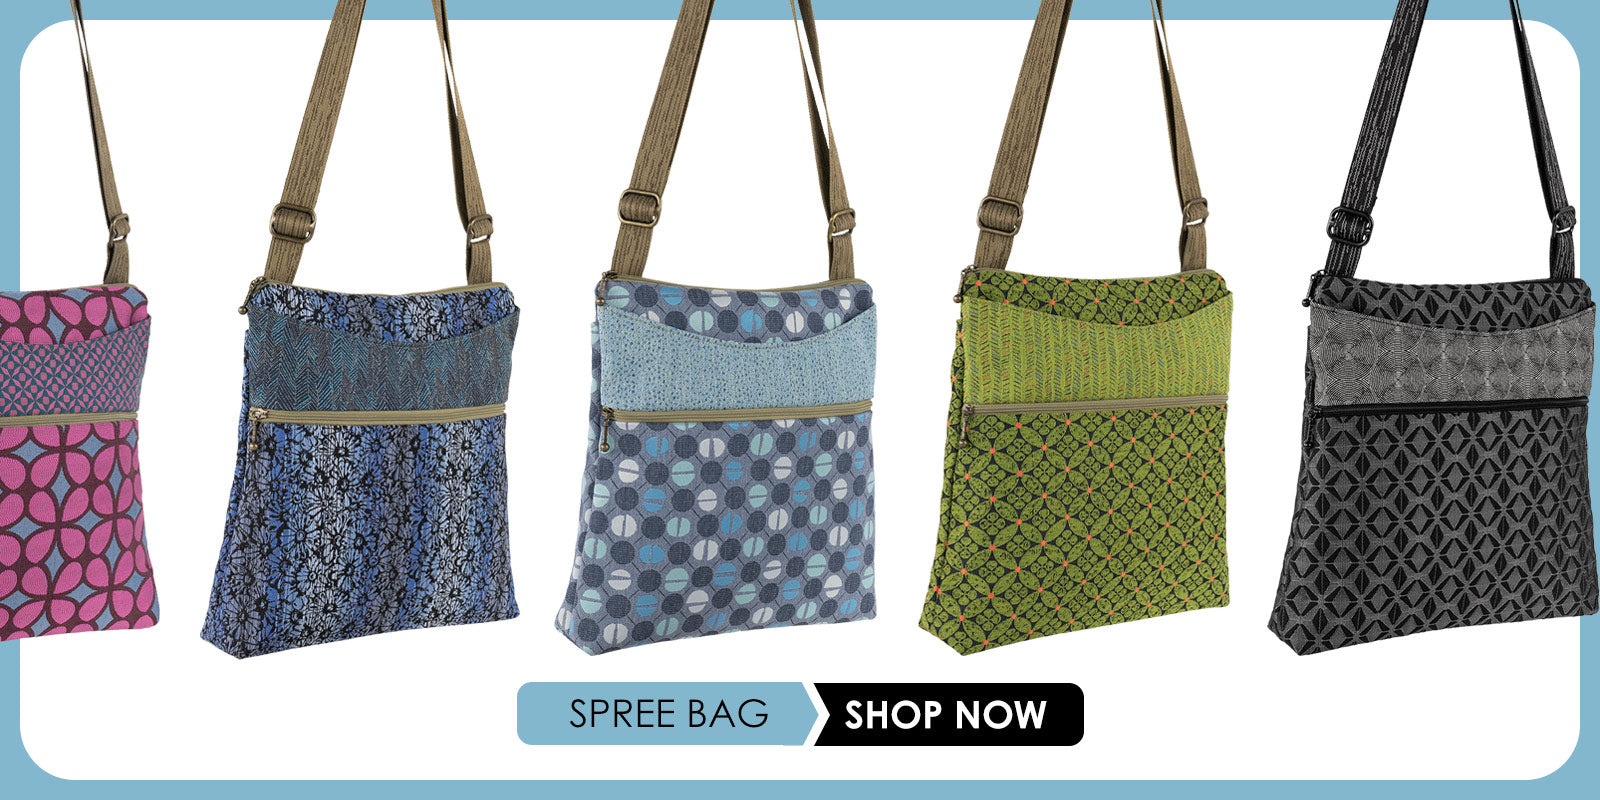 Shop Our Top Seller, the Spree Bag!